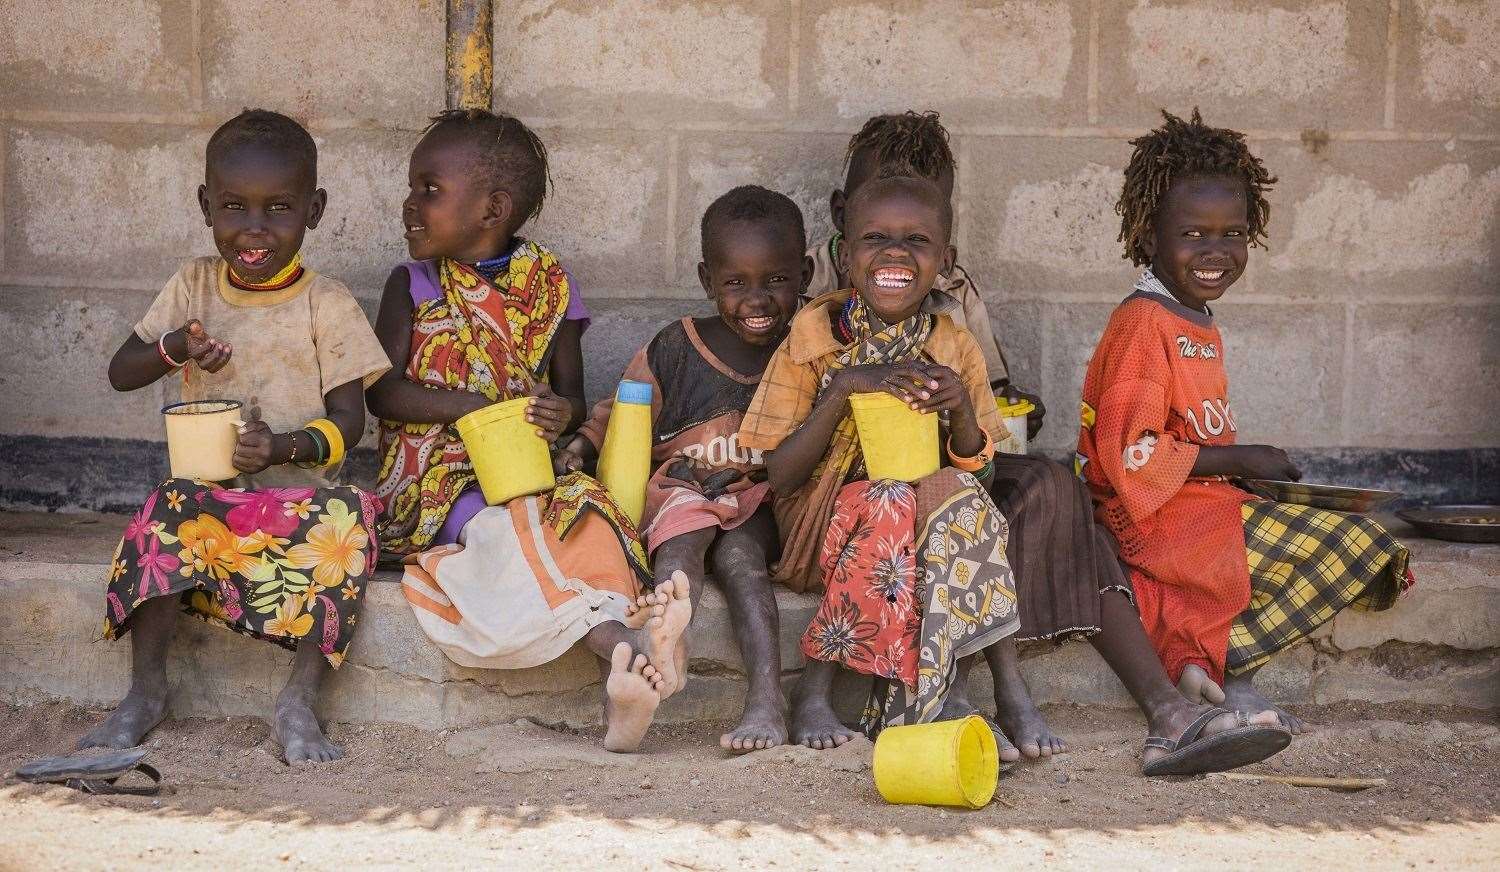 Children in Turkana, Kenya who normally receive Mary's Meals in the classroom will now receive food at home. Picture: Chris Watt